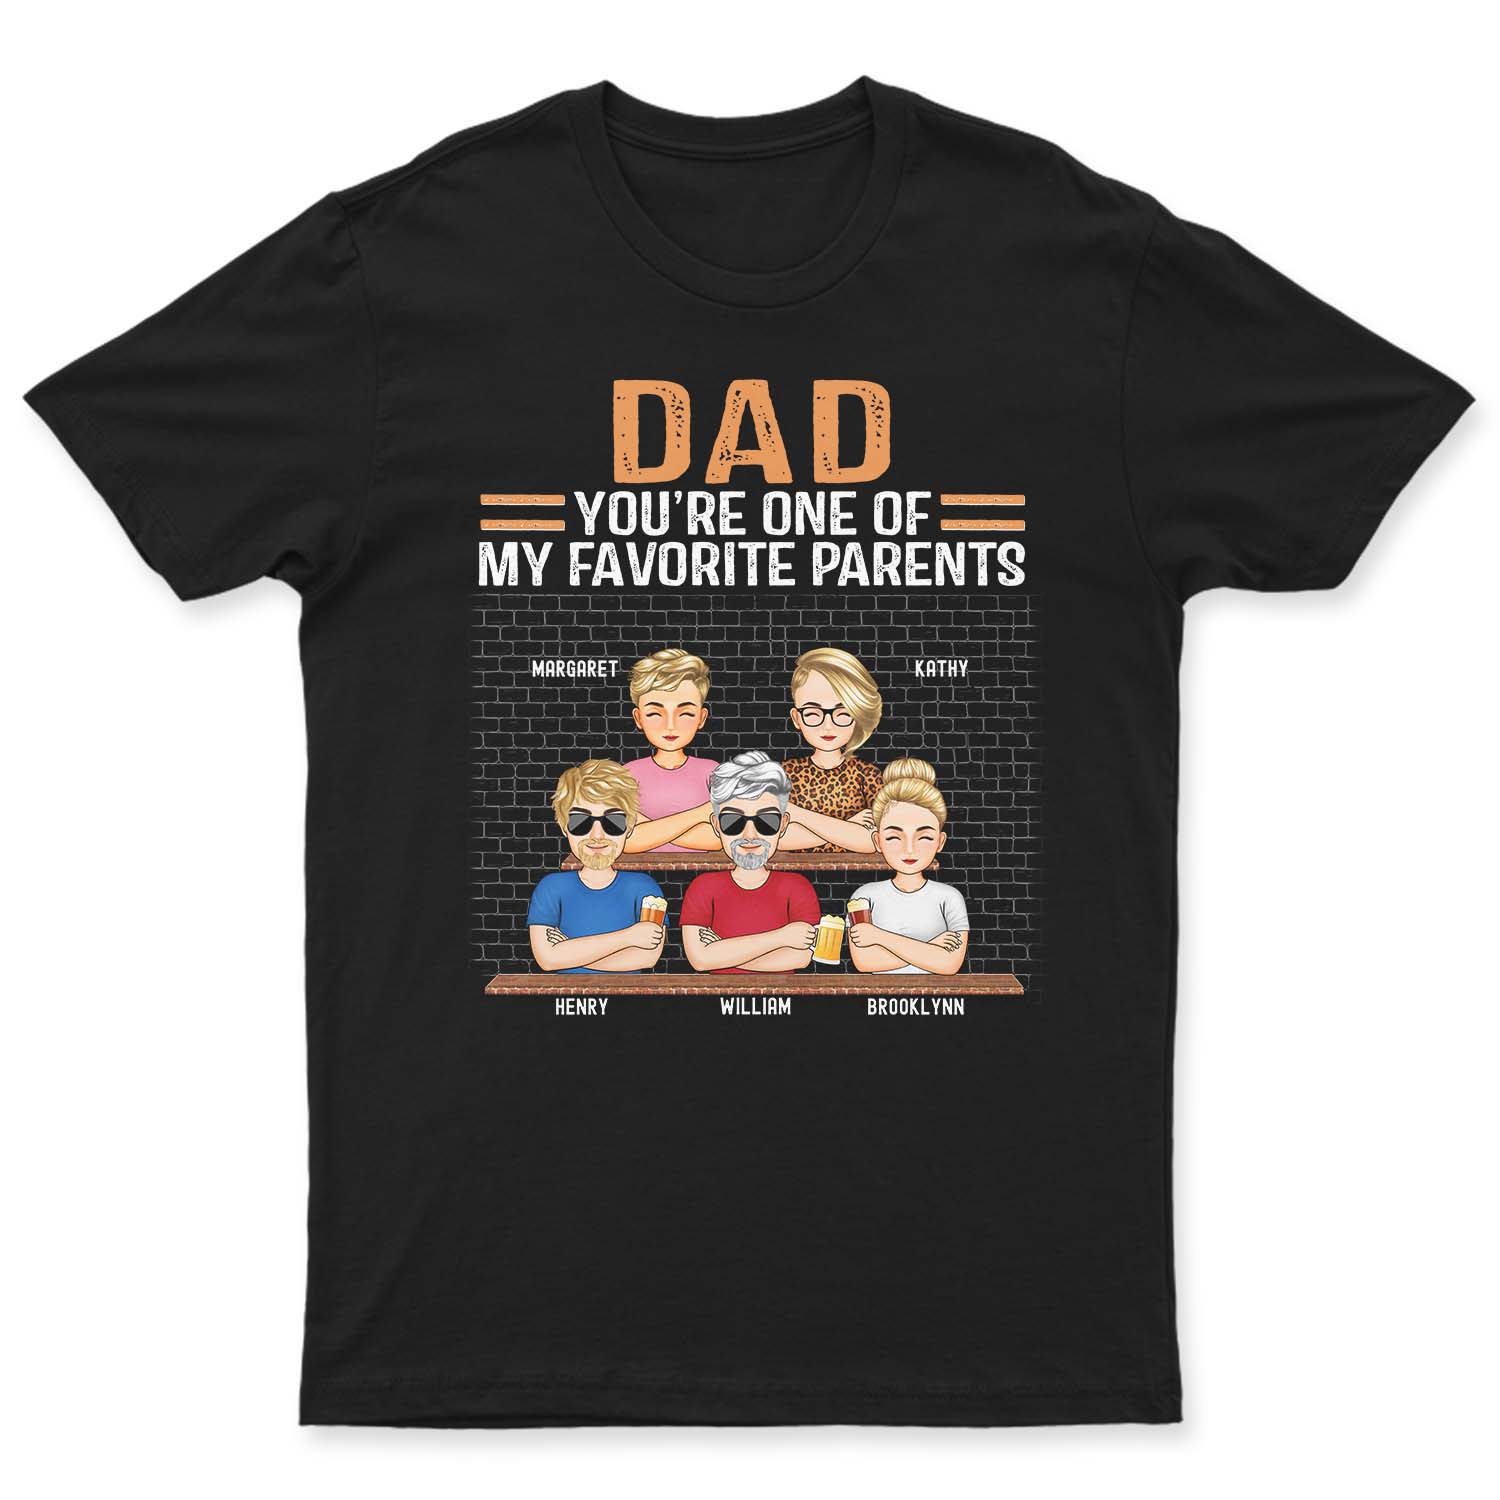 Dad You're One Of My Favorite Parents - Birthday, Loving Gift For Daddy, Father, Grandpa, Grandfather - Personalized Custom T Shirt